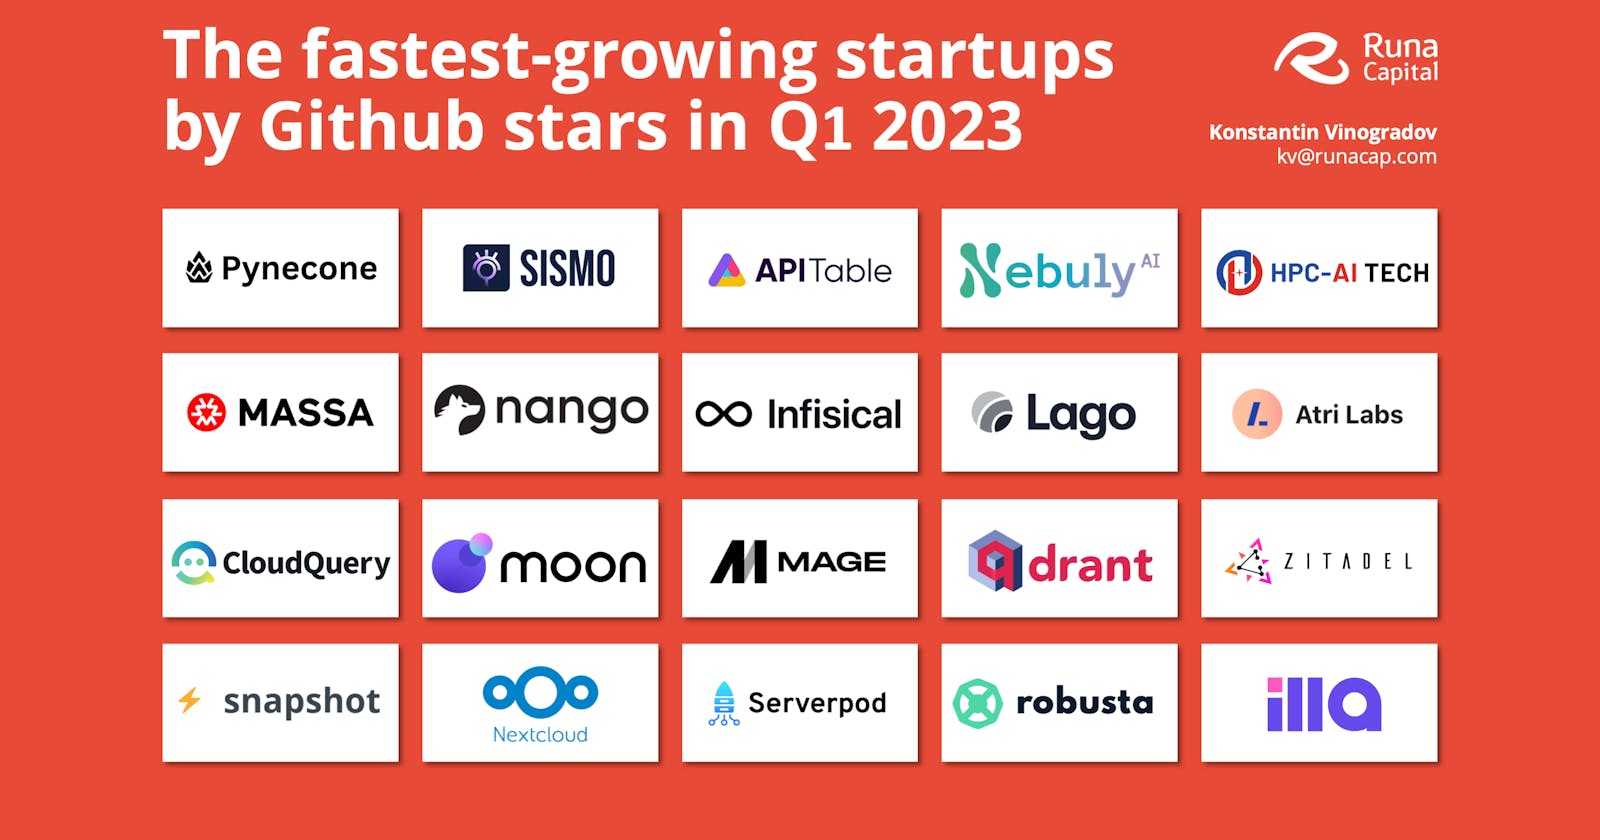 How ILLA Cloud Became One of the Fastest-Growing Open-Source Startups in 2023 Q1